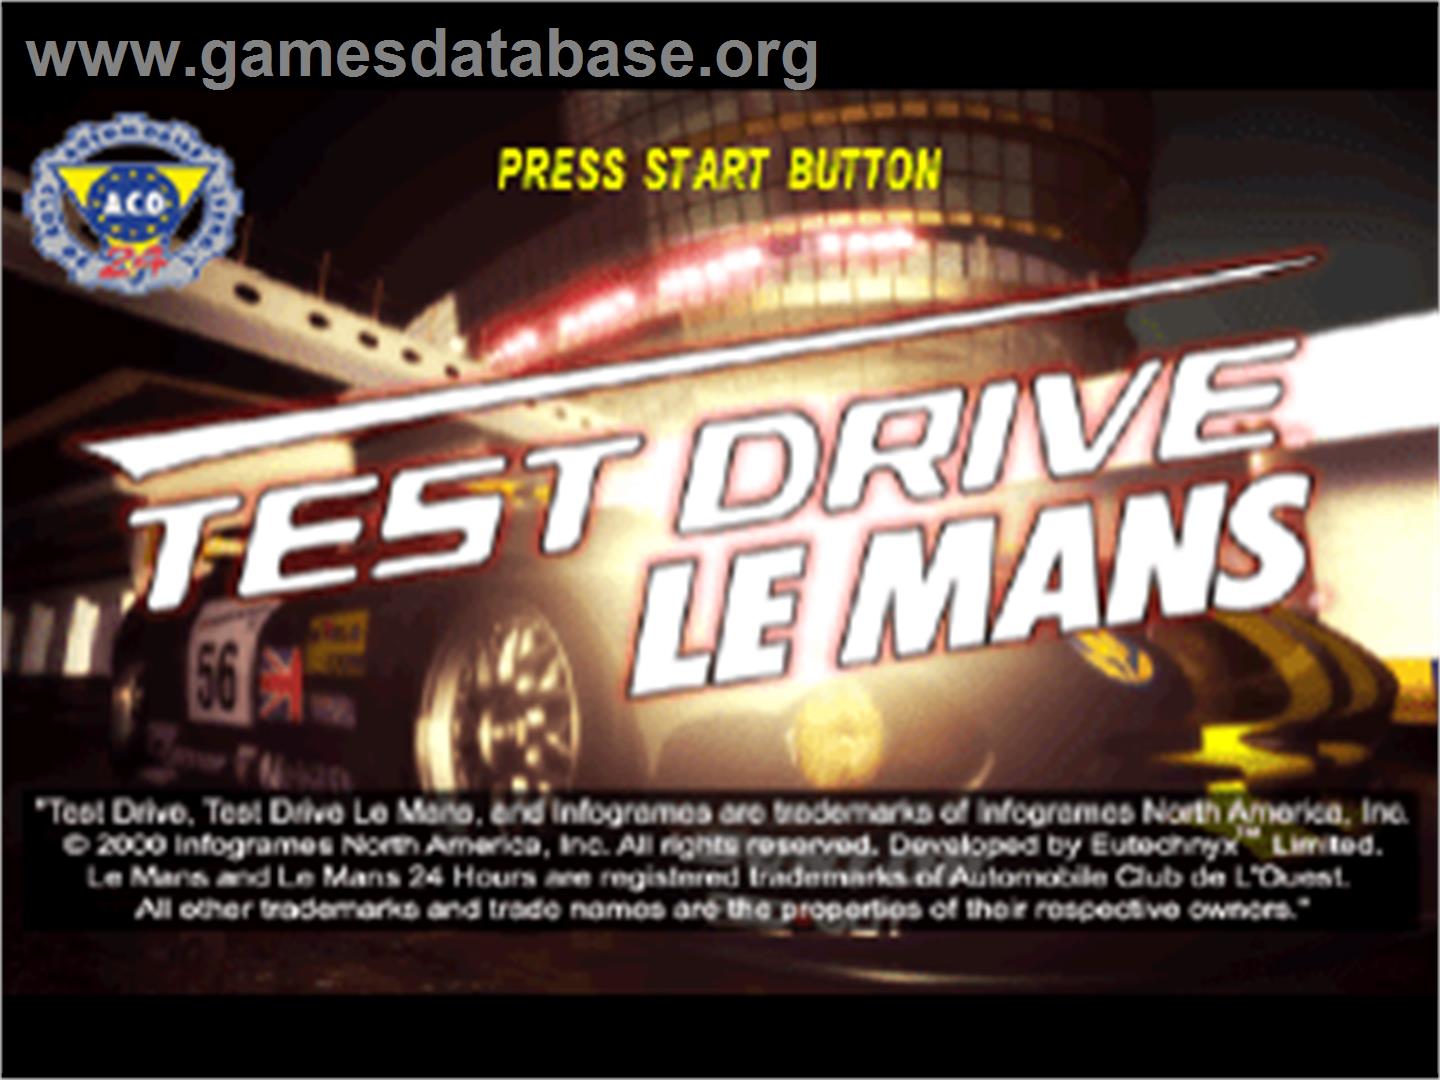 Test Drive: Le Mans - Sony Playstation - Artwork - Title Screen